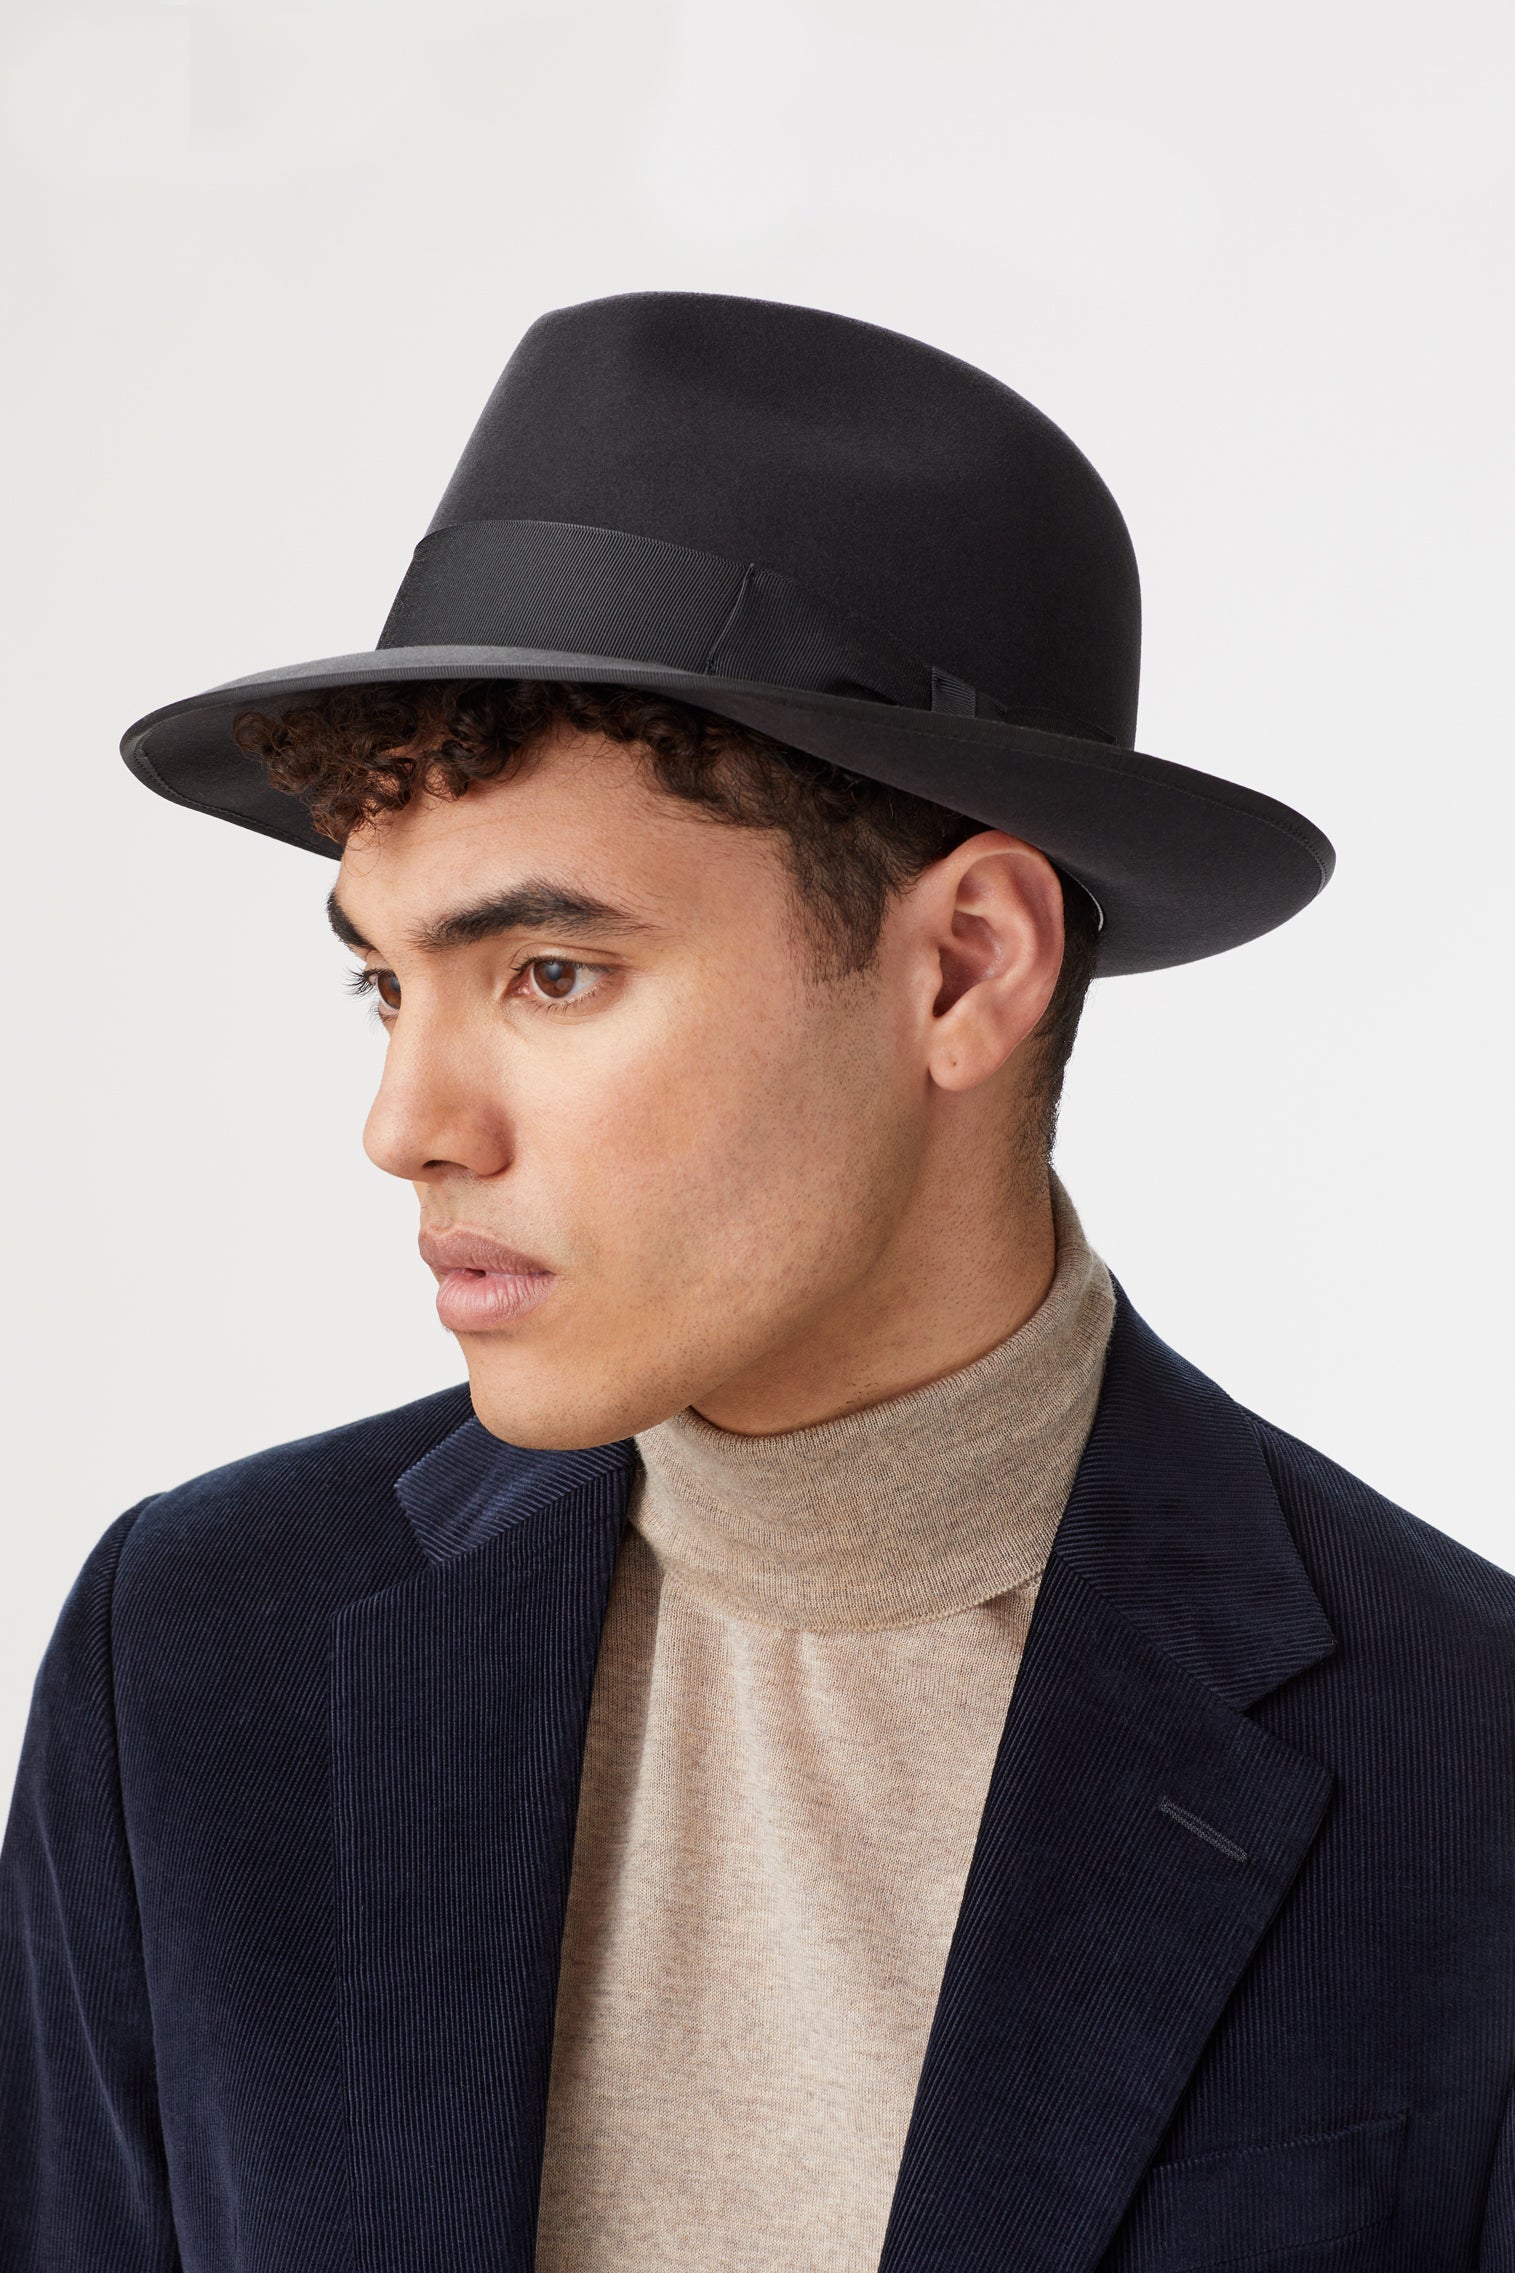 Escorial Wool Albany Trilby - Hats for Oval Face Shapes - Lock & Co. Hatters London UK